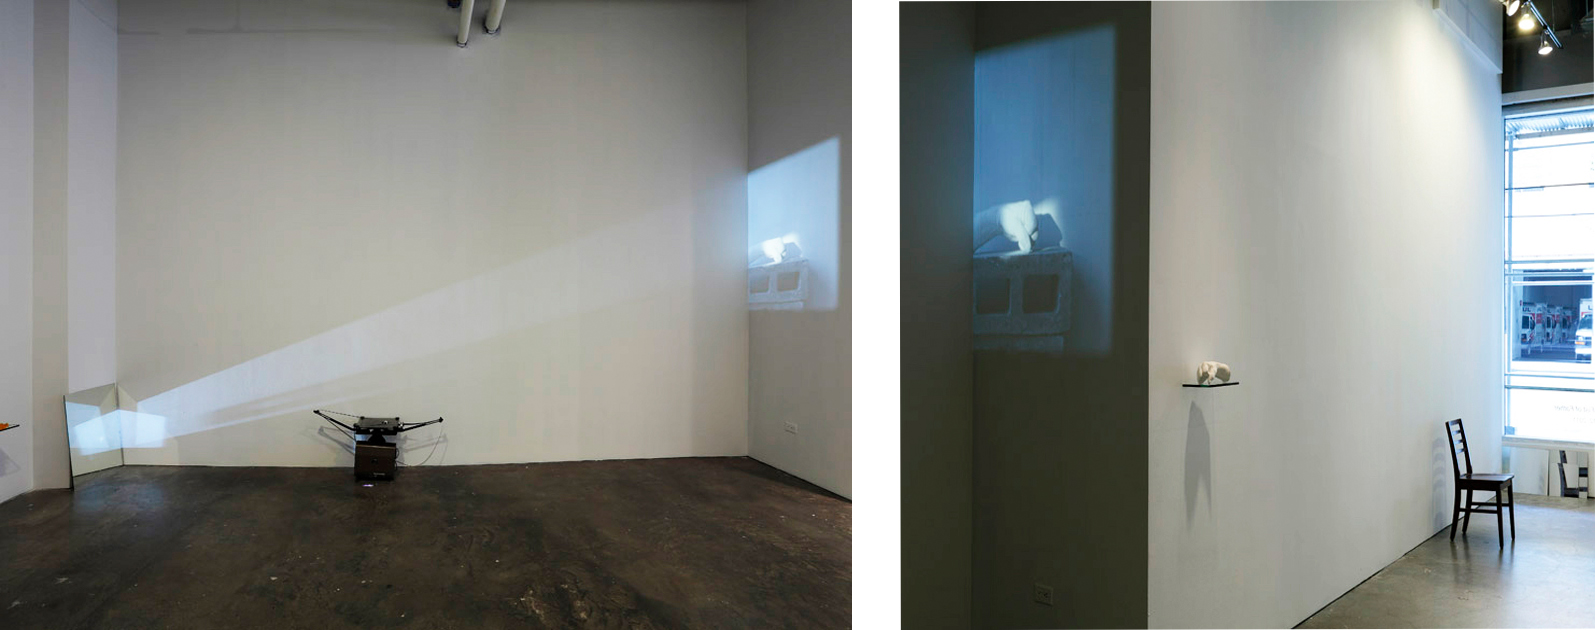 "Directing Light onto Fist of Father" (Installation view) 2011